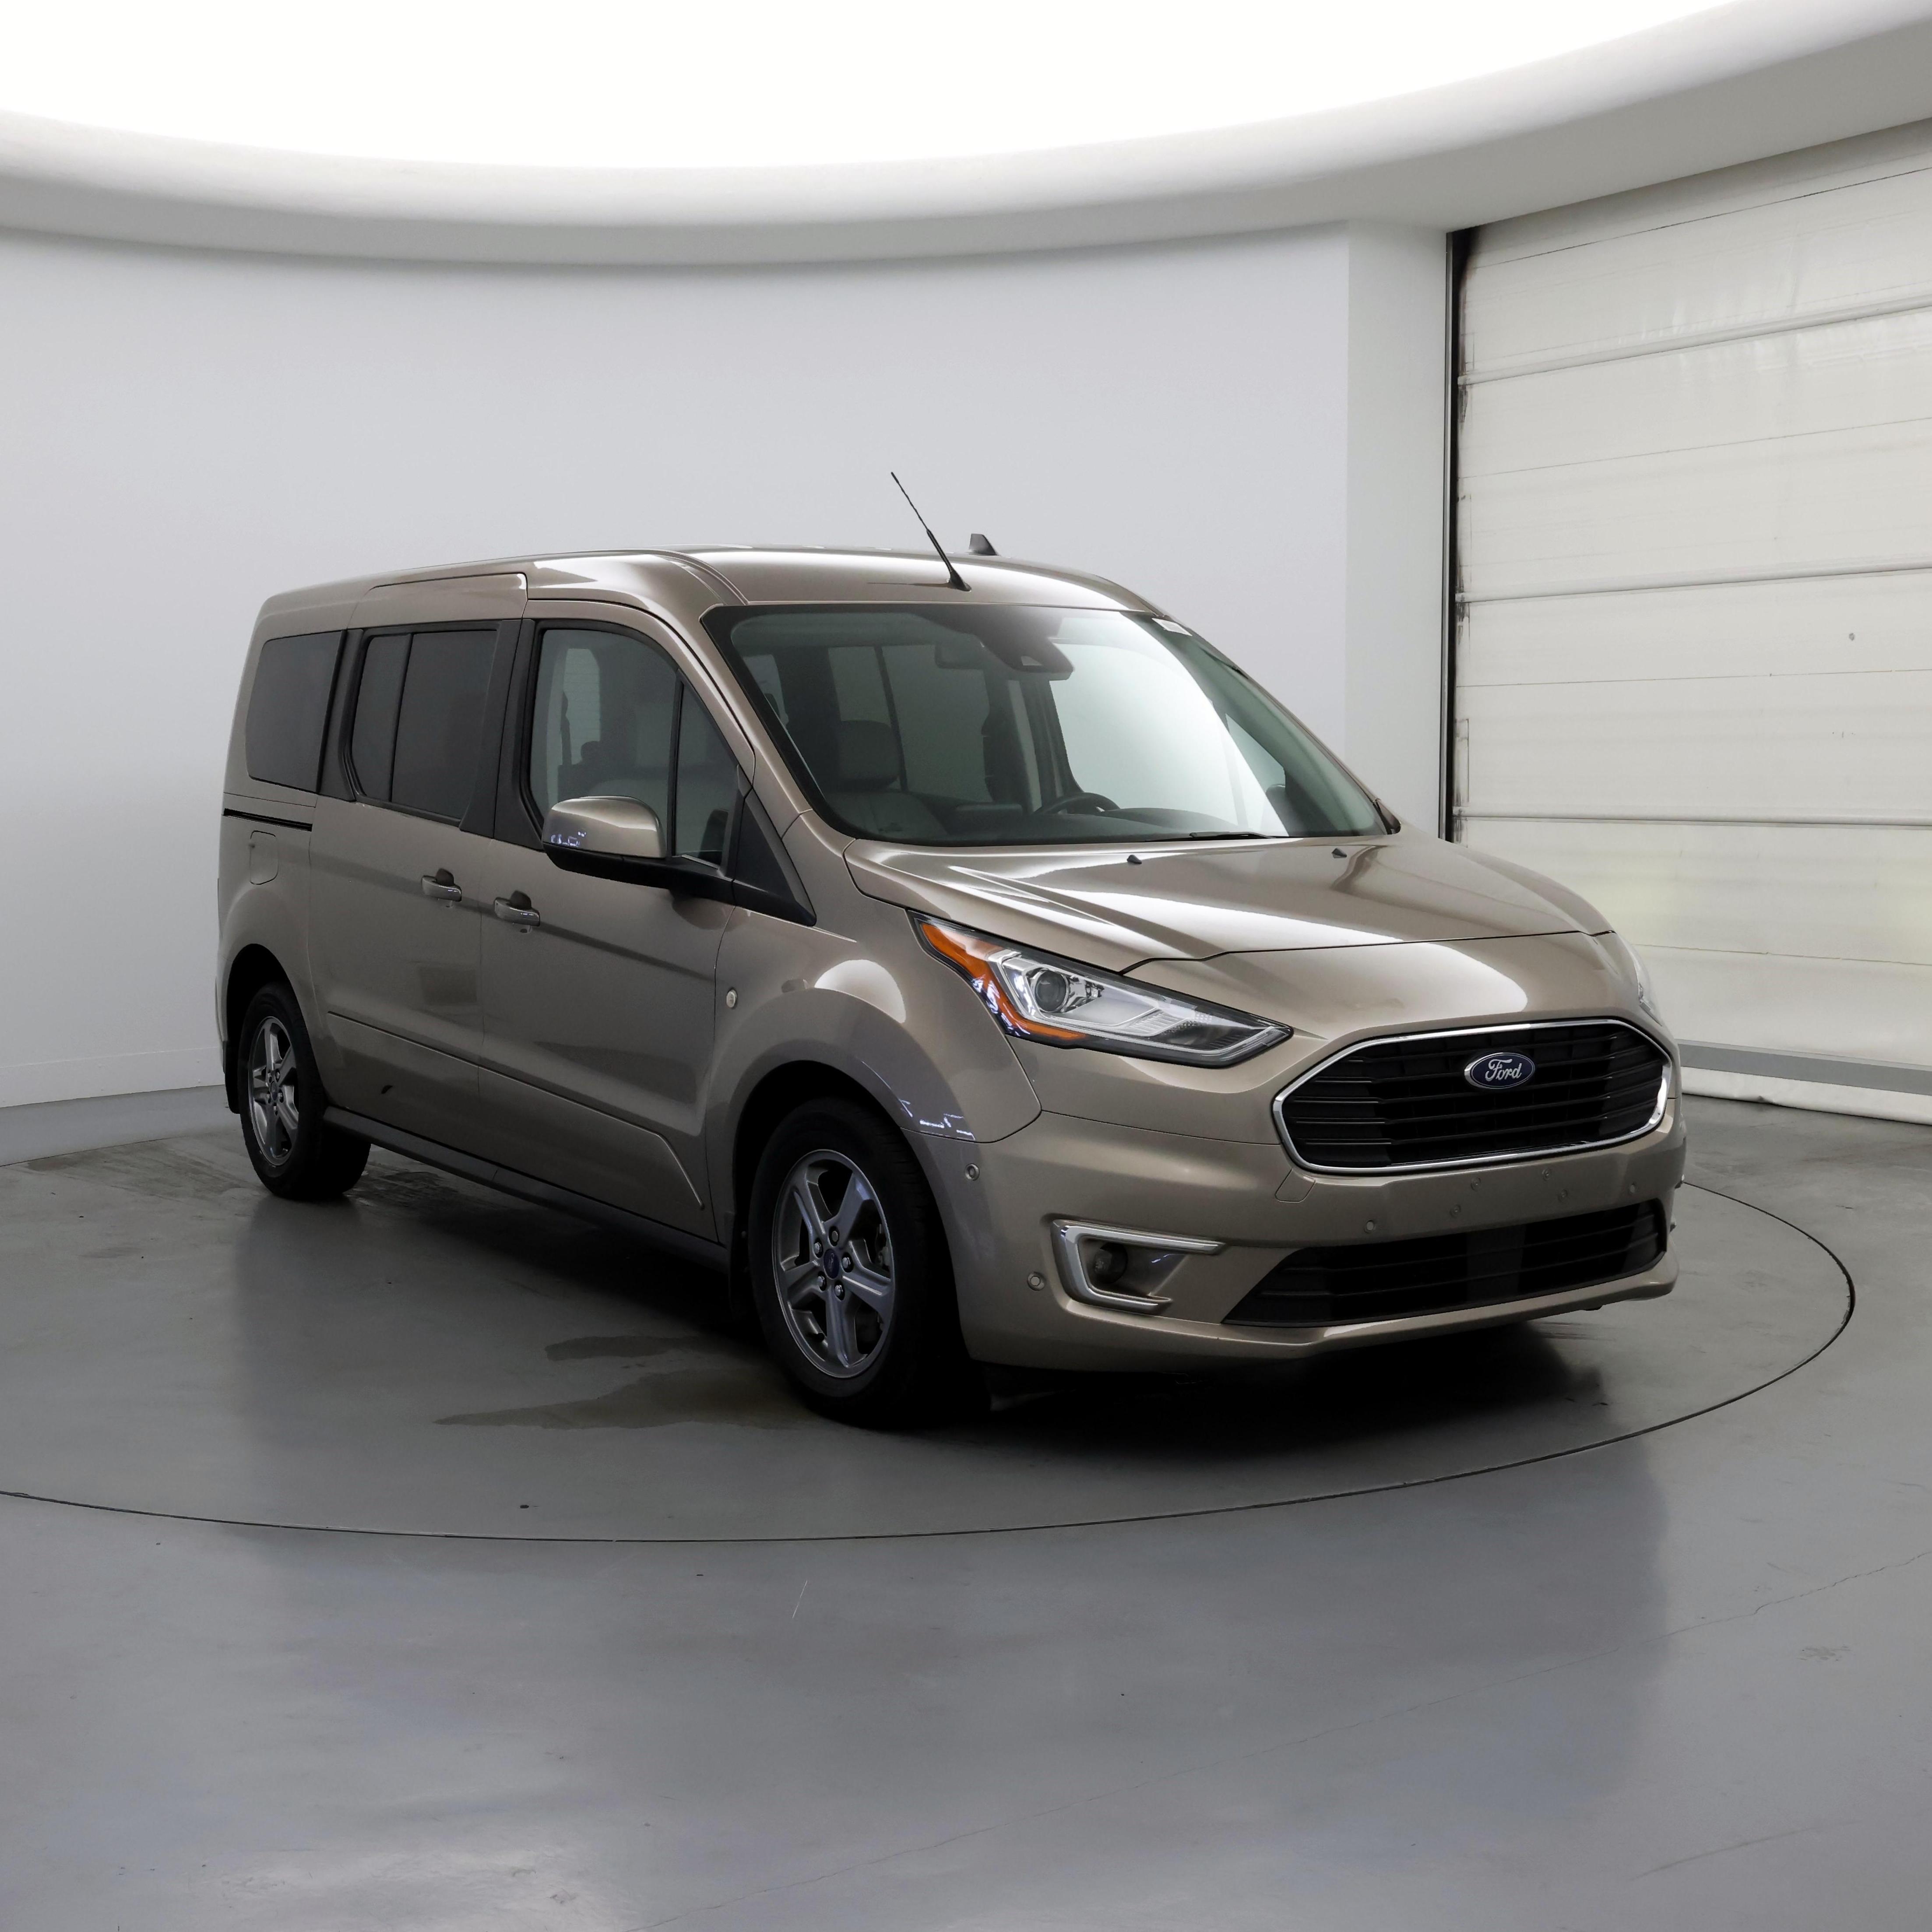 2020 Ford Transit Connect Wagon Titanium LWB FWD with Rear Liftgate